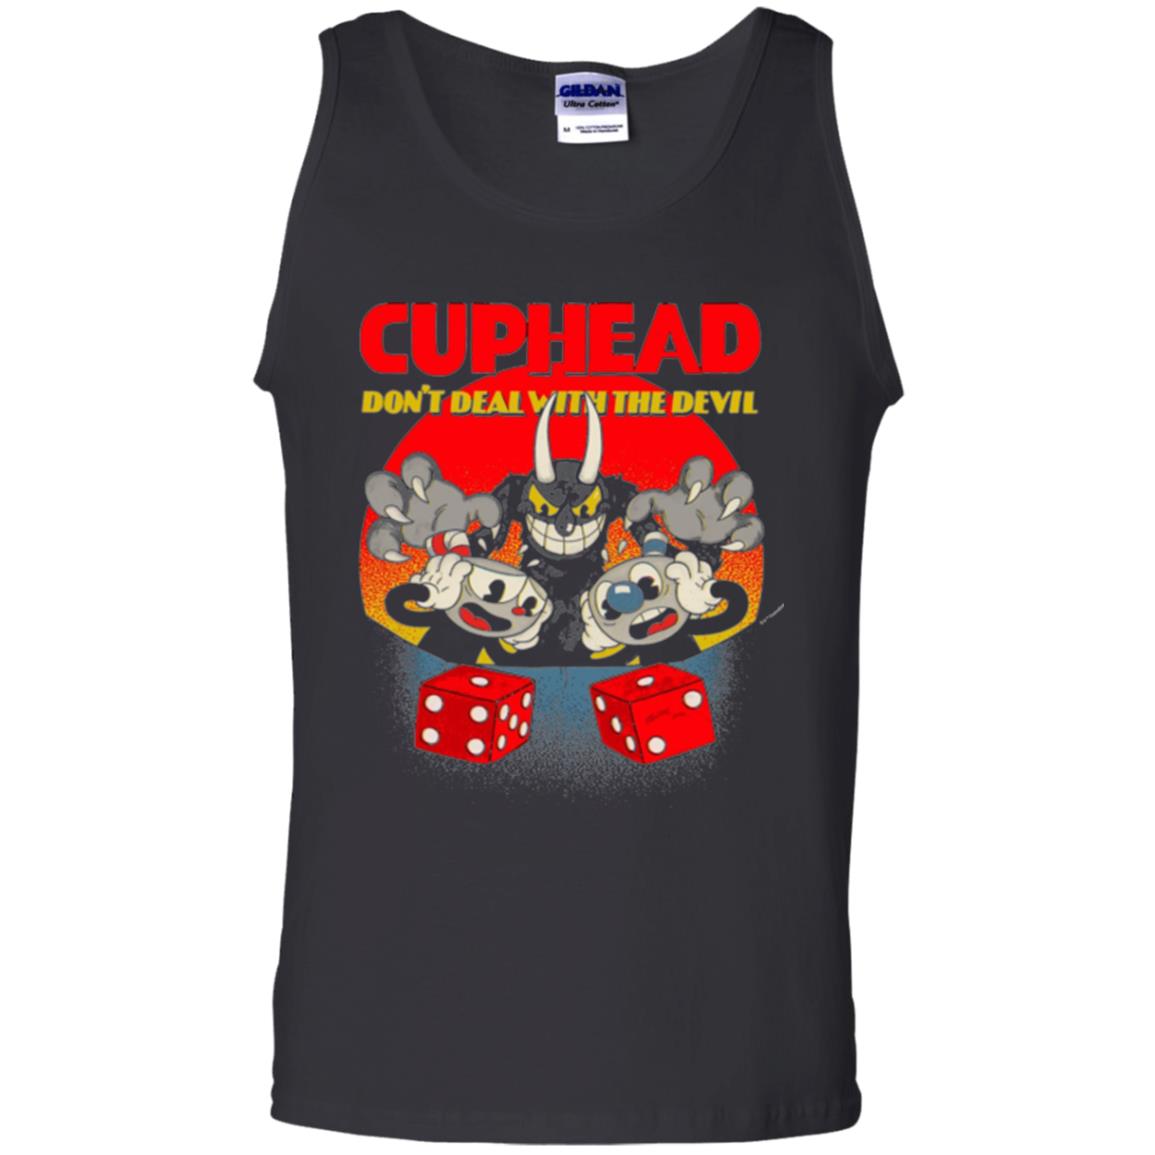 Gamer T-shirt Cuphead Don_t Deal With The Devil